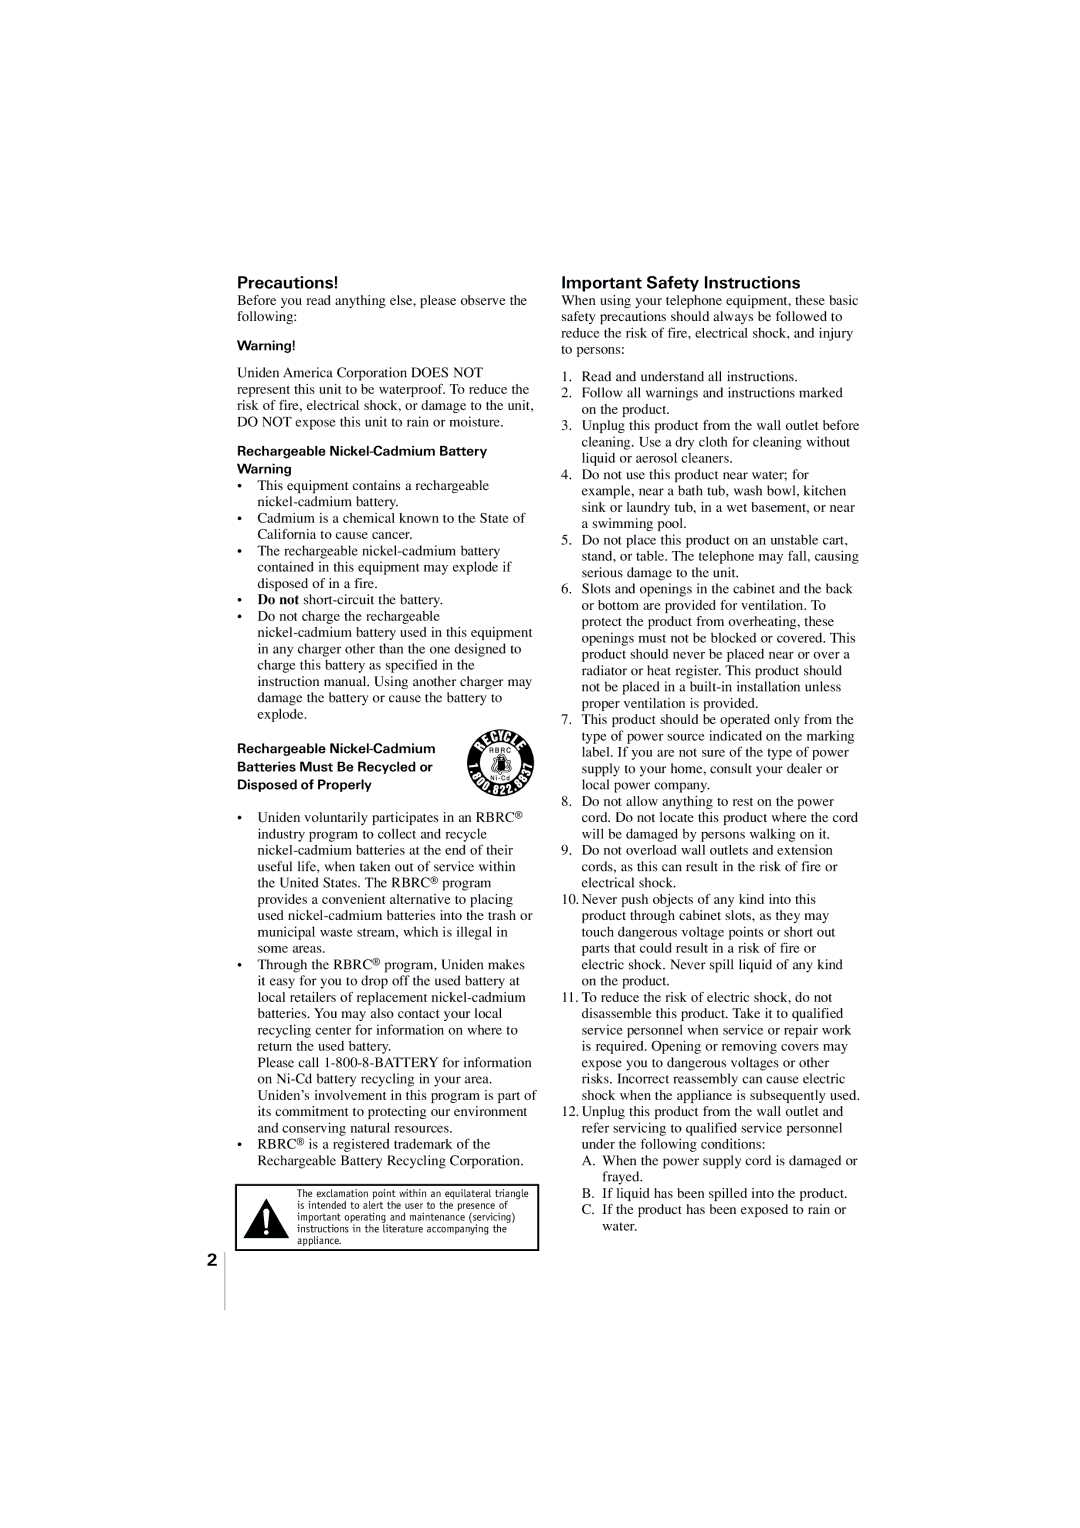 Uniden EXP2905 manual Precautions, Important Safety Instructions 